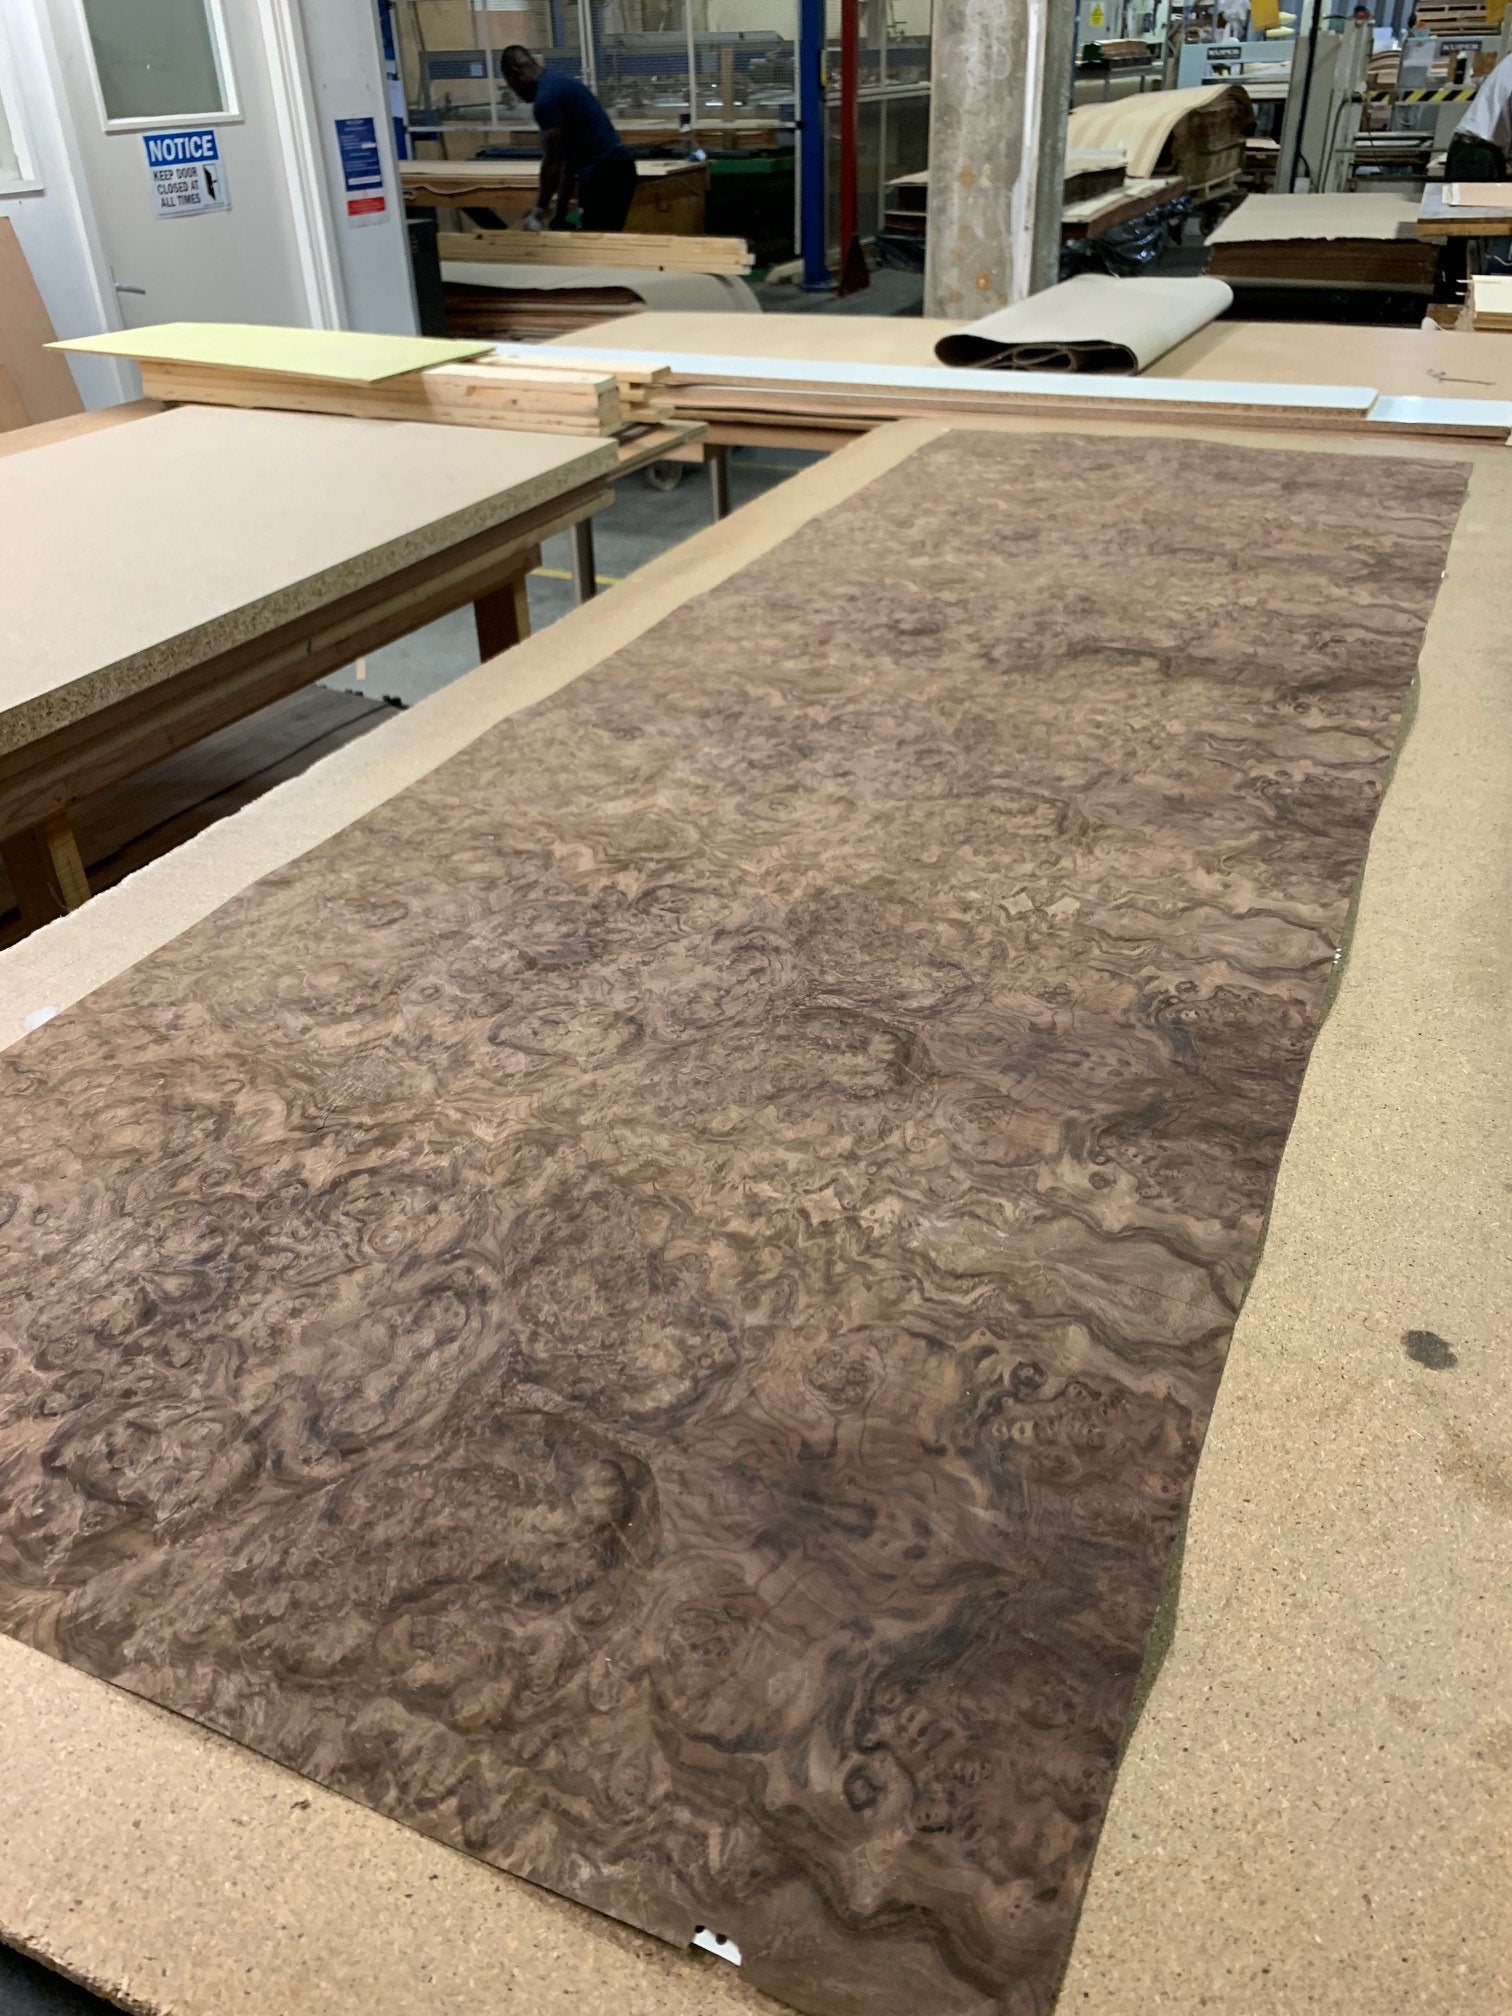 What is Walnut Burl veneer and how is it produced?